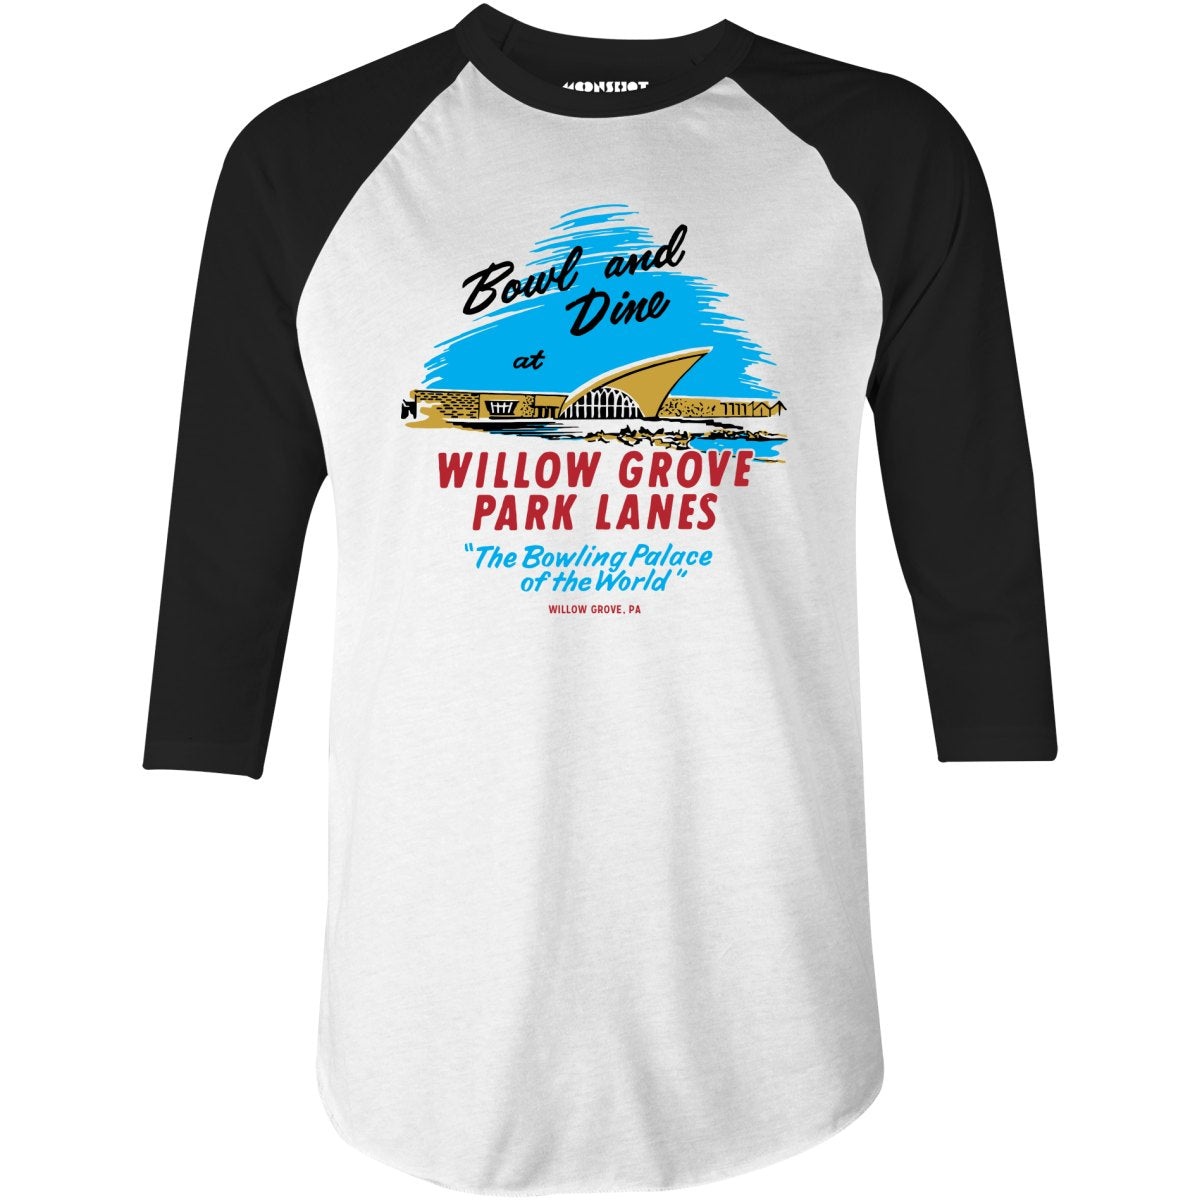 Willow Grove Park Lanes - Willow Grove, PA - Vintage Bowling Alley - 3/4 Sleeve Raglan T-Shirt